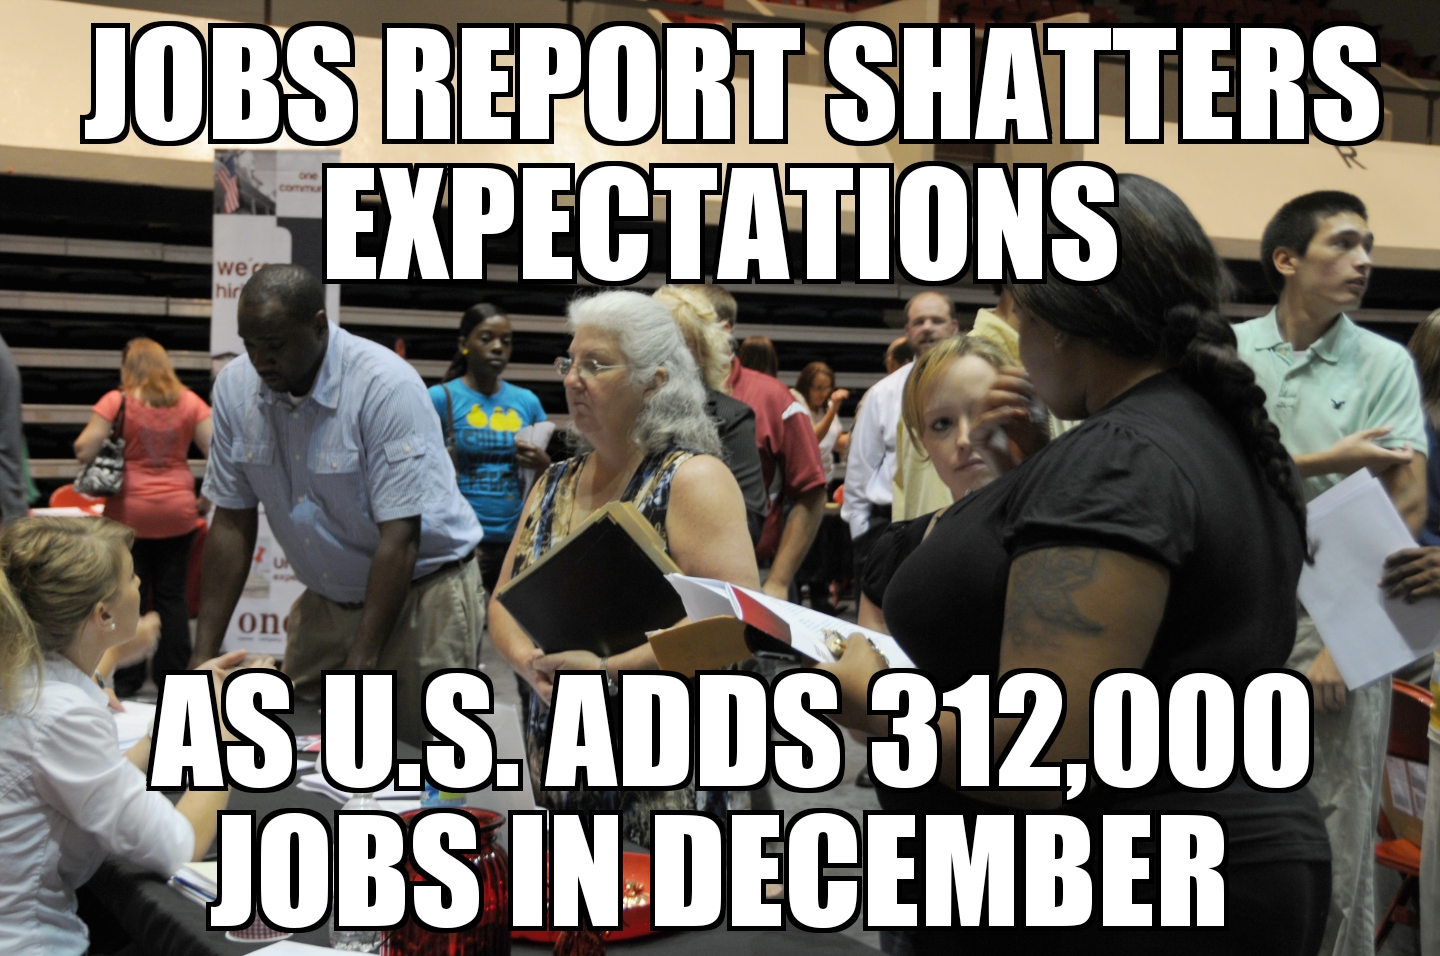 U.S. jobs report shatters expectations